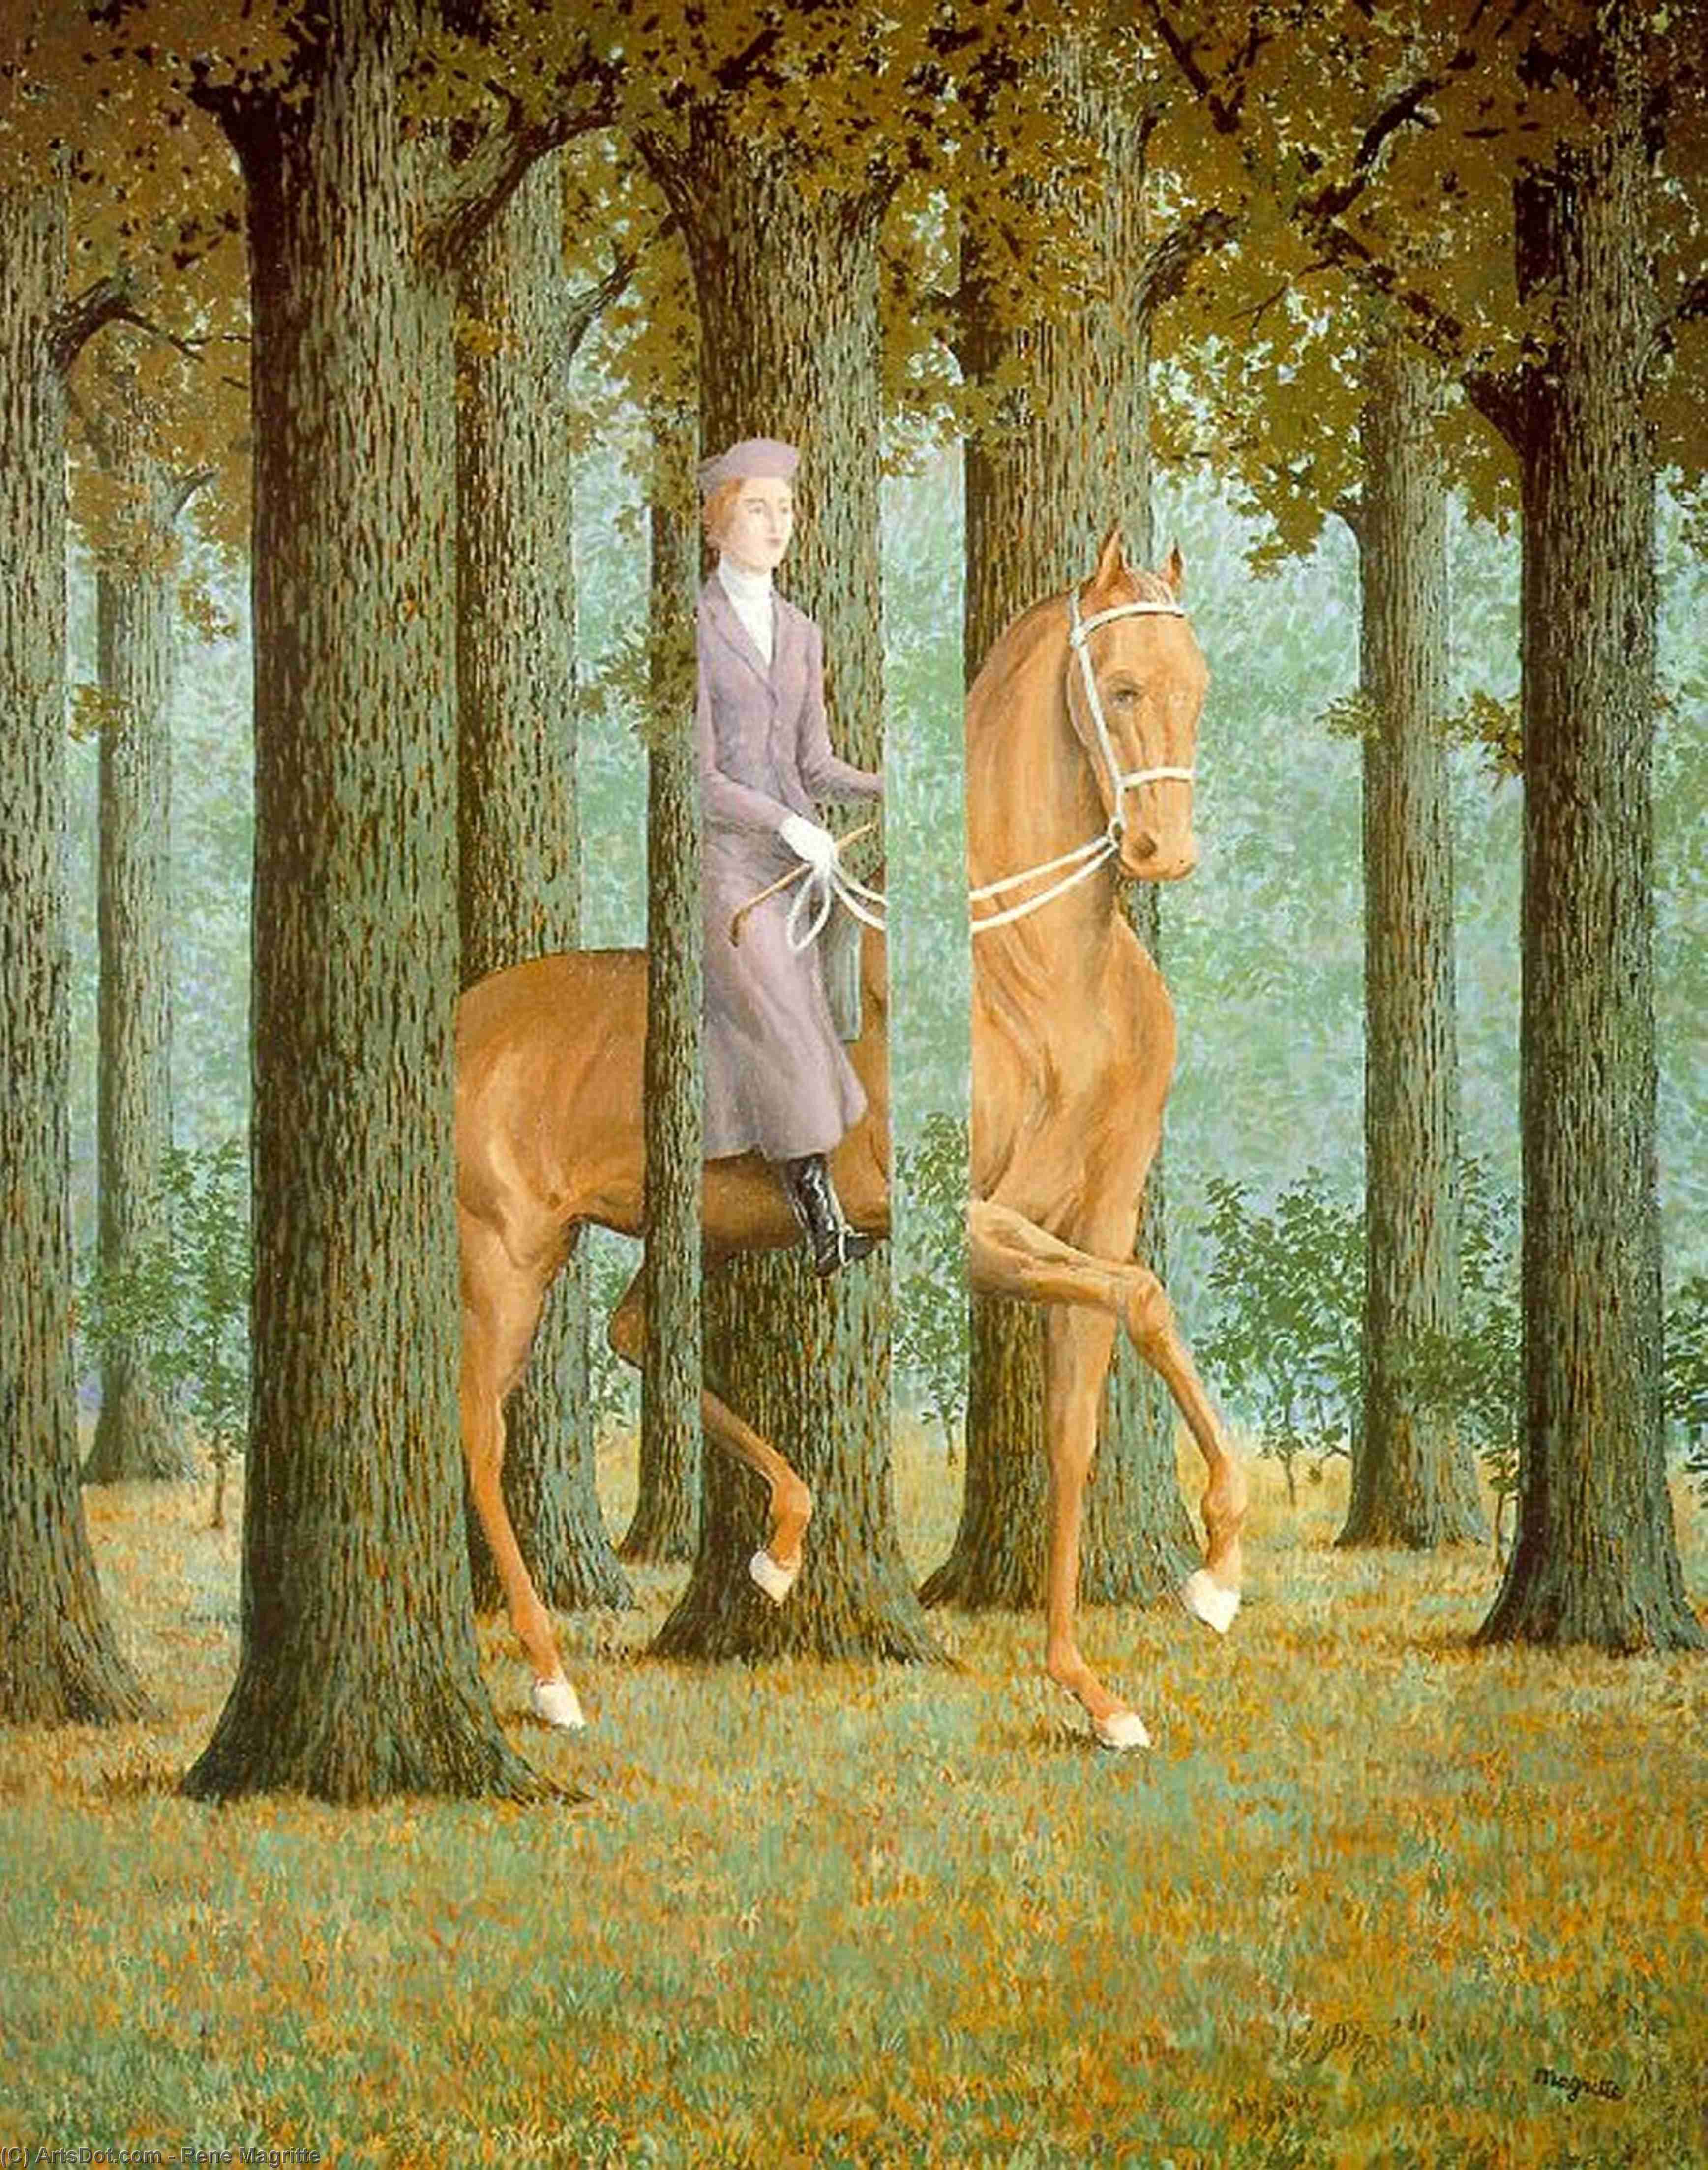 The Blank Check - Rene Magritte